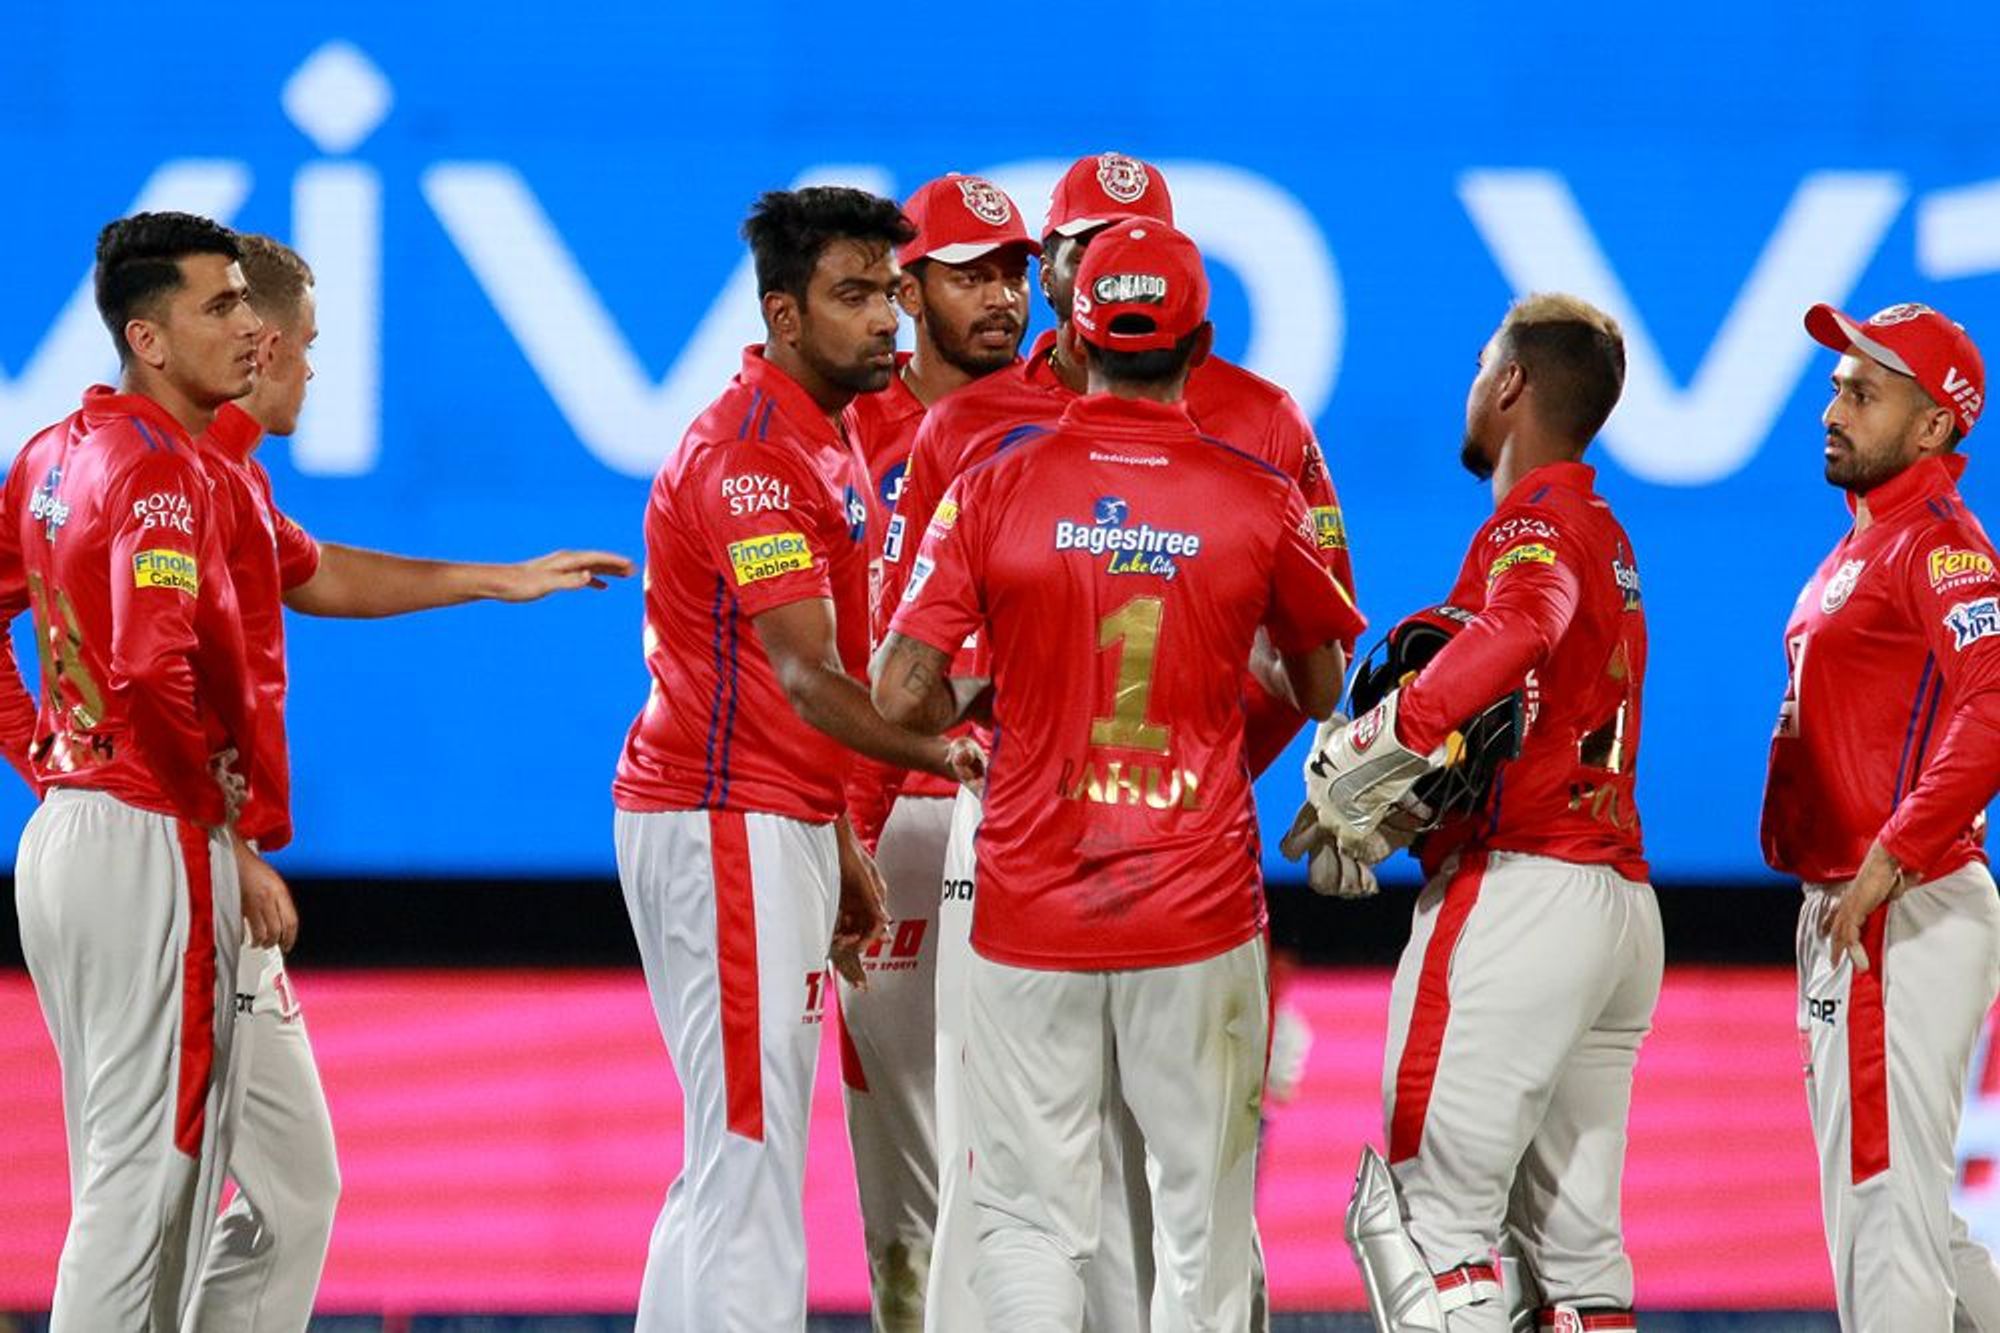 DC vs KXIP | Player Ratings: Chris Gayle heroic knock in vain as other batsmen fail to step up in Kings XI Punjab’s loss to Delhi Capitals